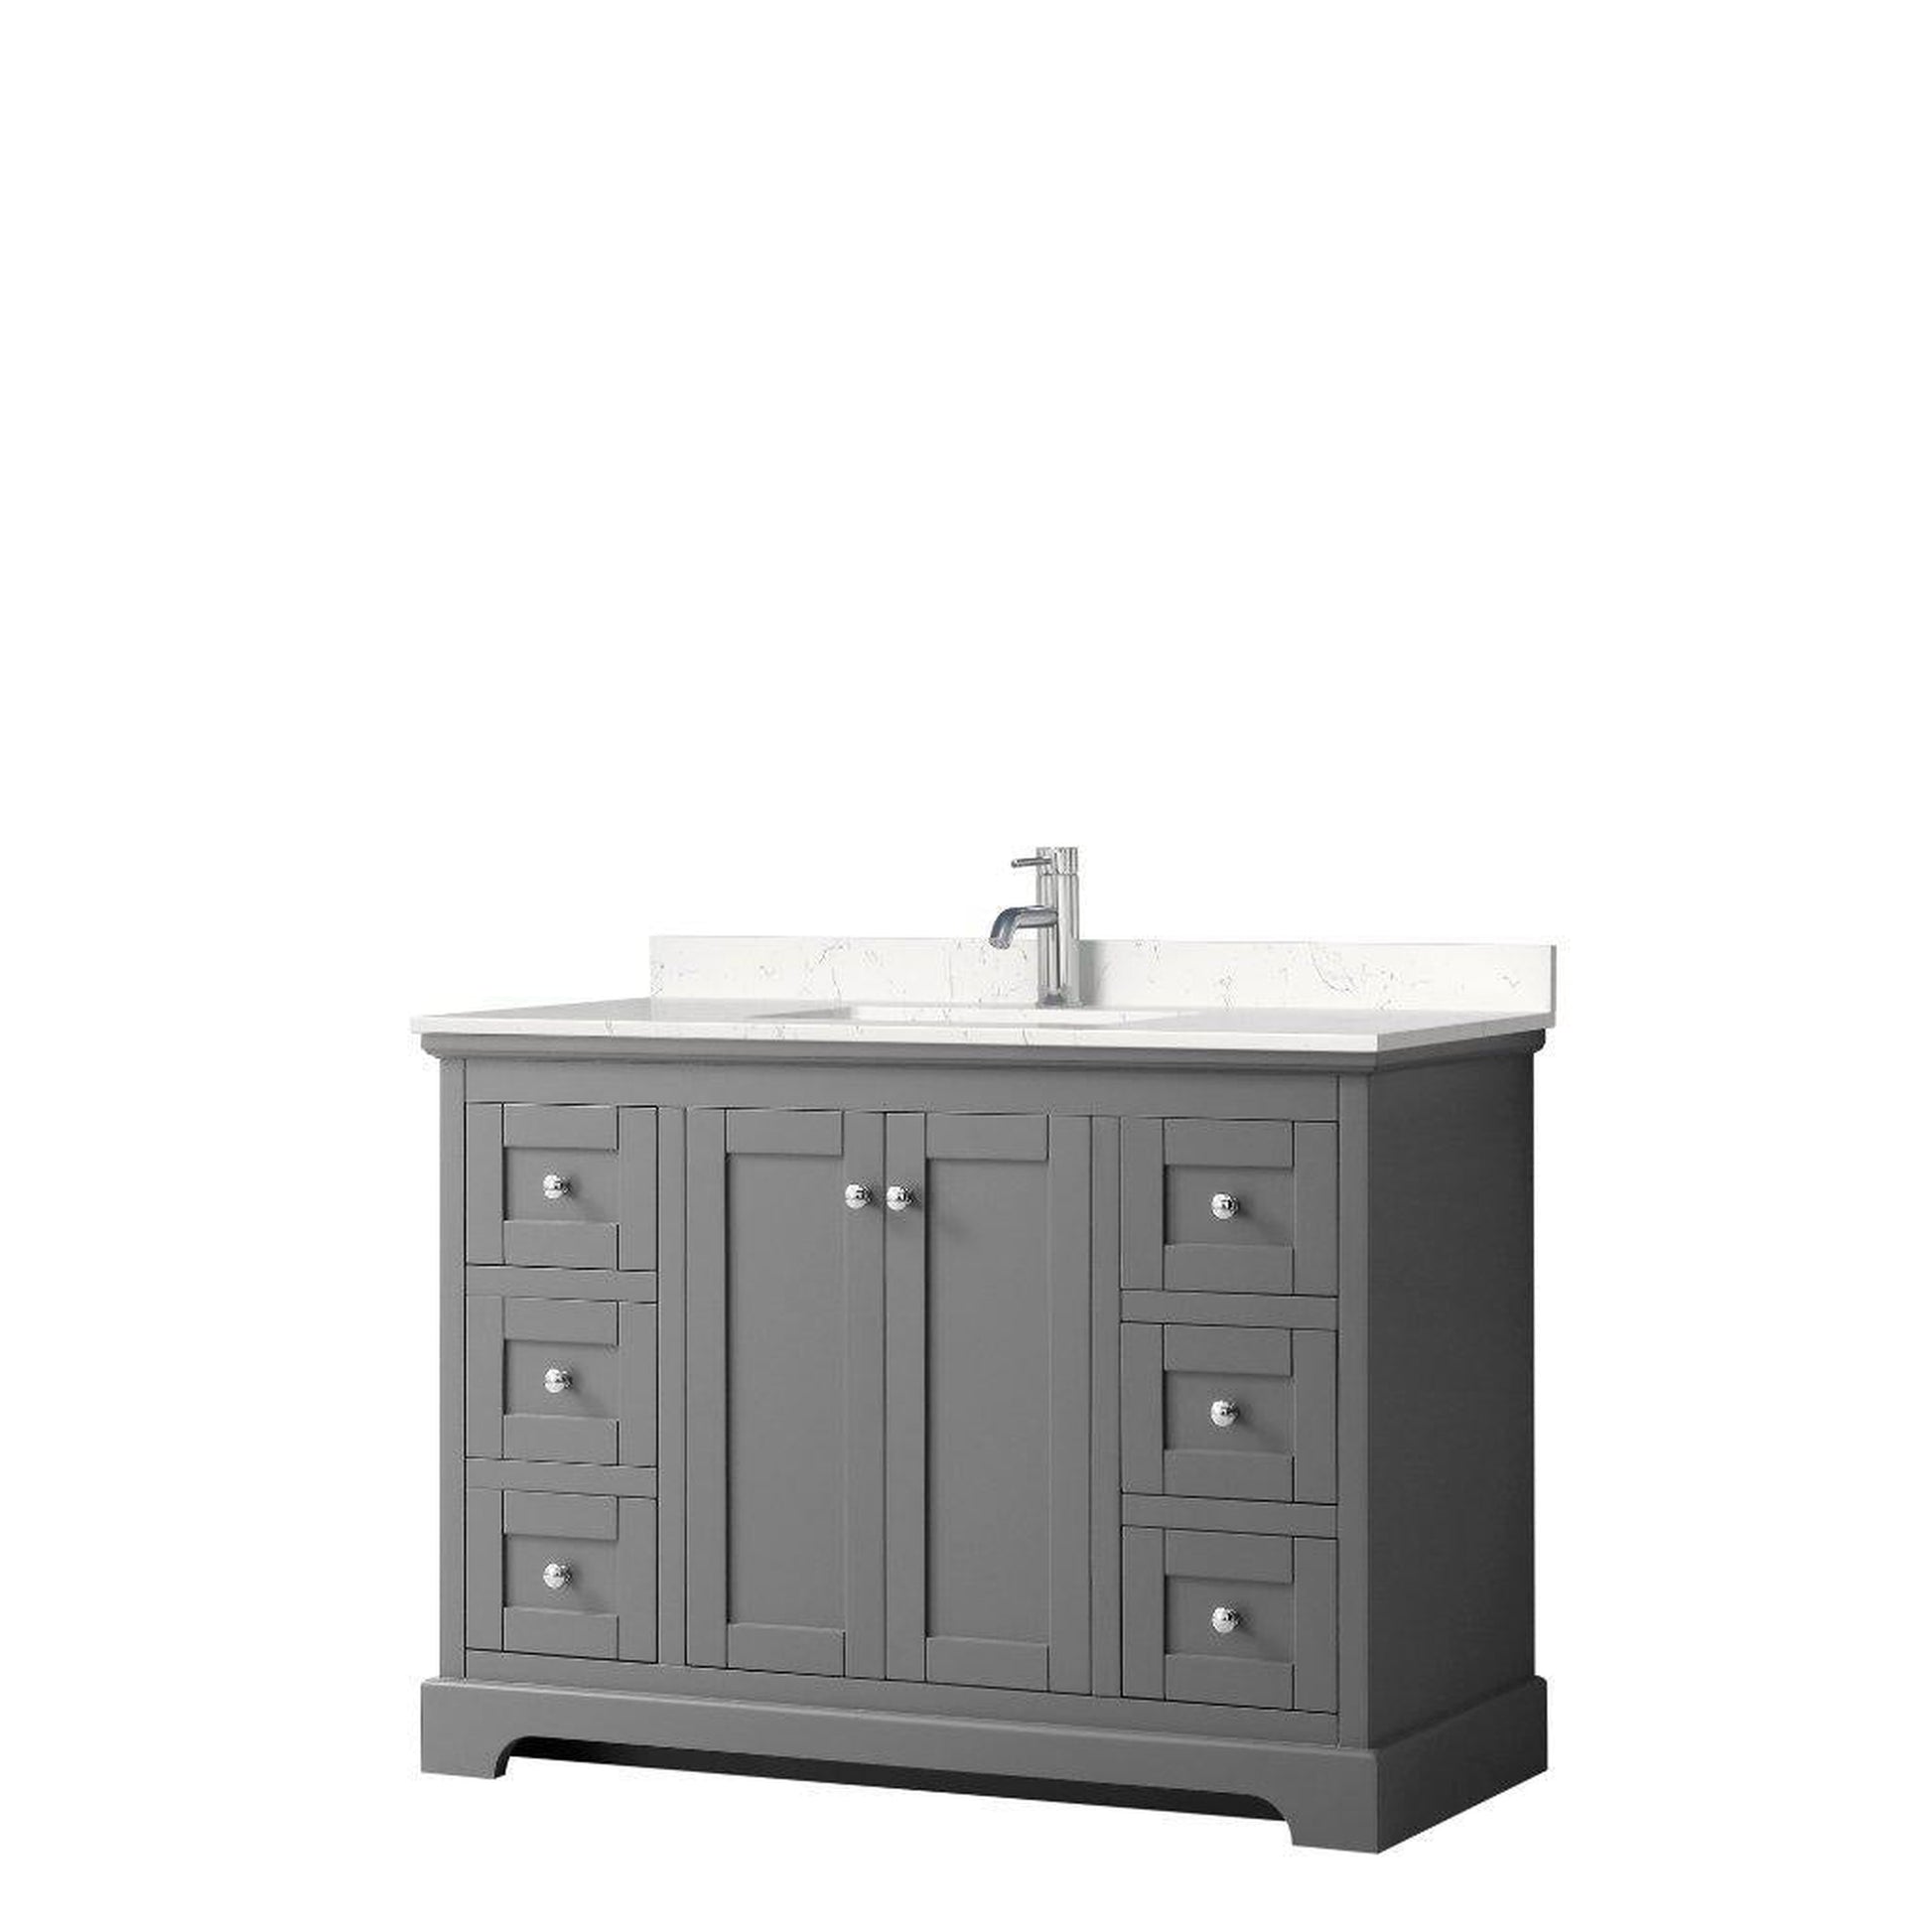 Wyndham Collection Avery 48" Dark Gray Single Bathroom Vanity With Light-Vein Cultured Marble Countertop With 1-Hole Faucet And Square Sink